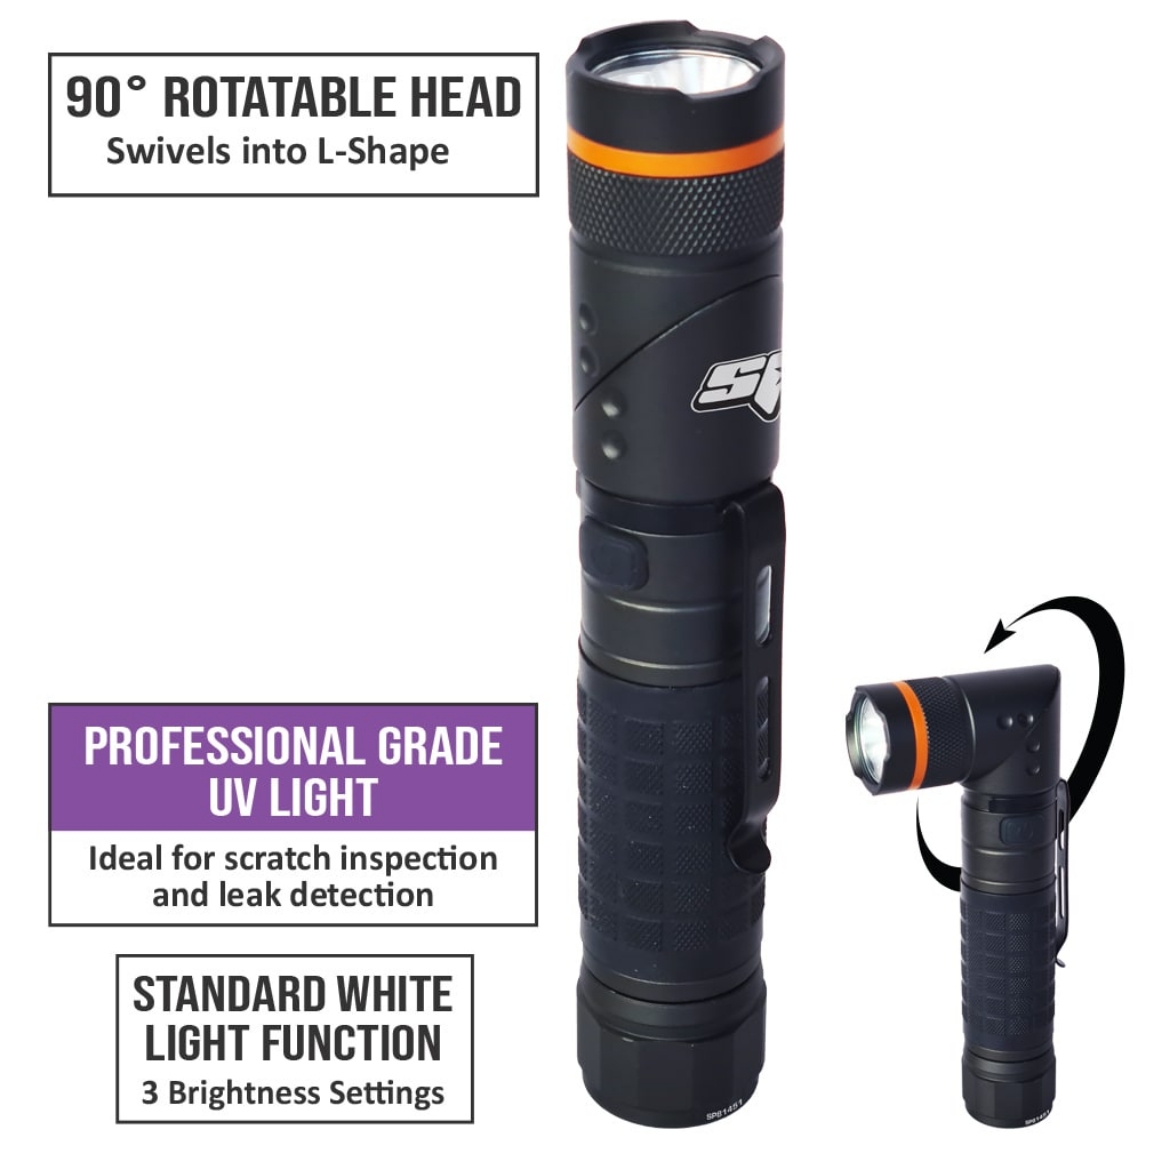 Picture of TORCH/WORK LIGHT - UV INSPECTION LED MULTIFUNCTION - MAG BASE - ROTATABLE HEAD